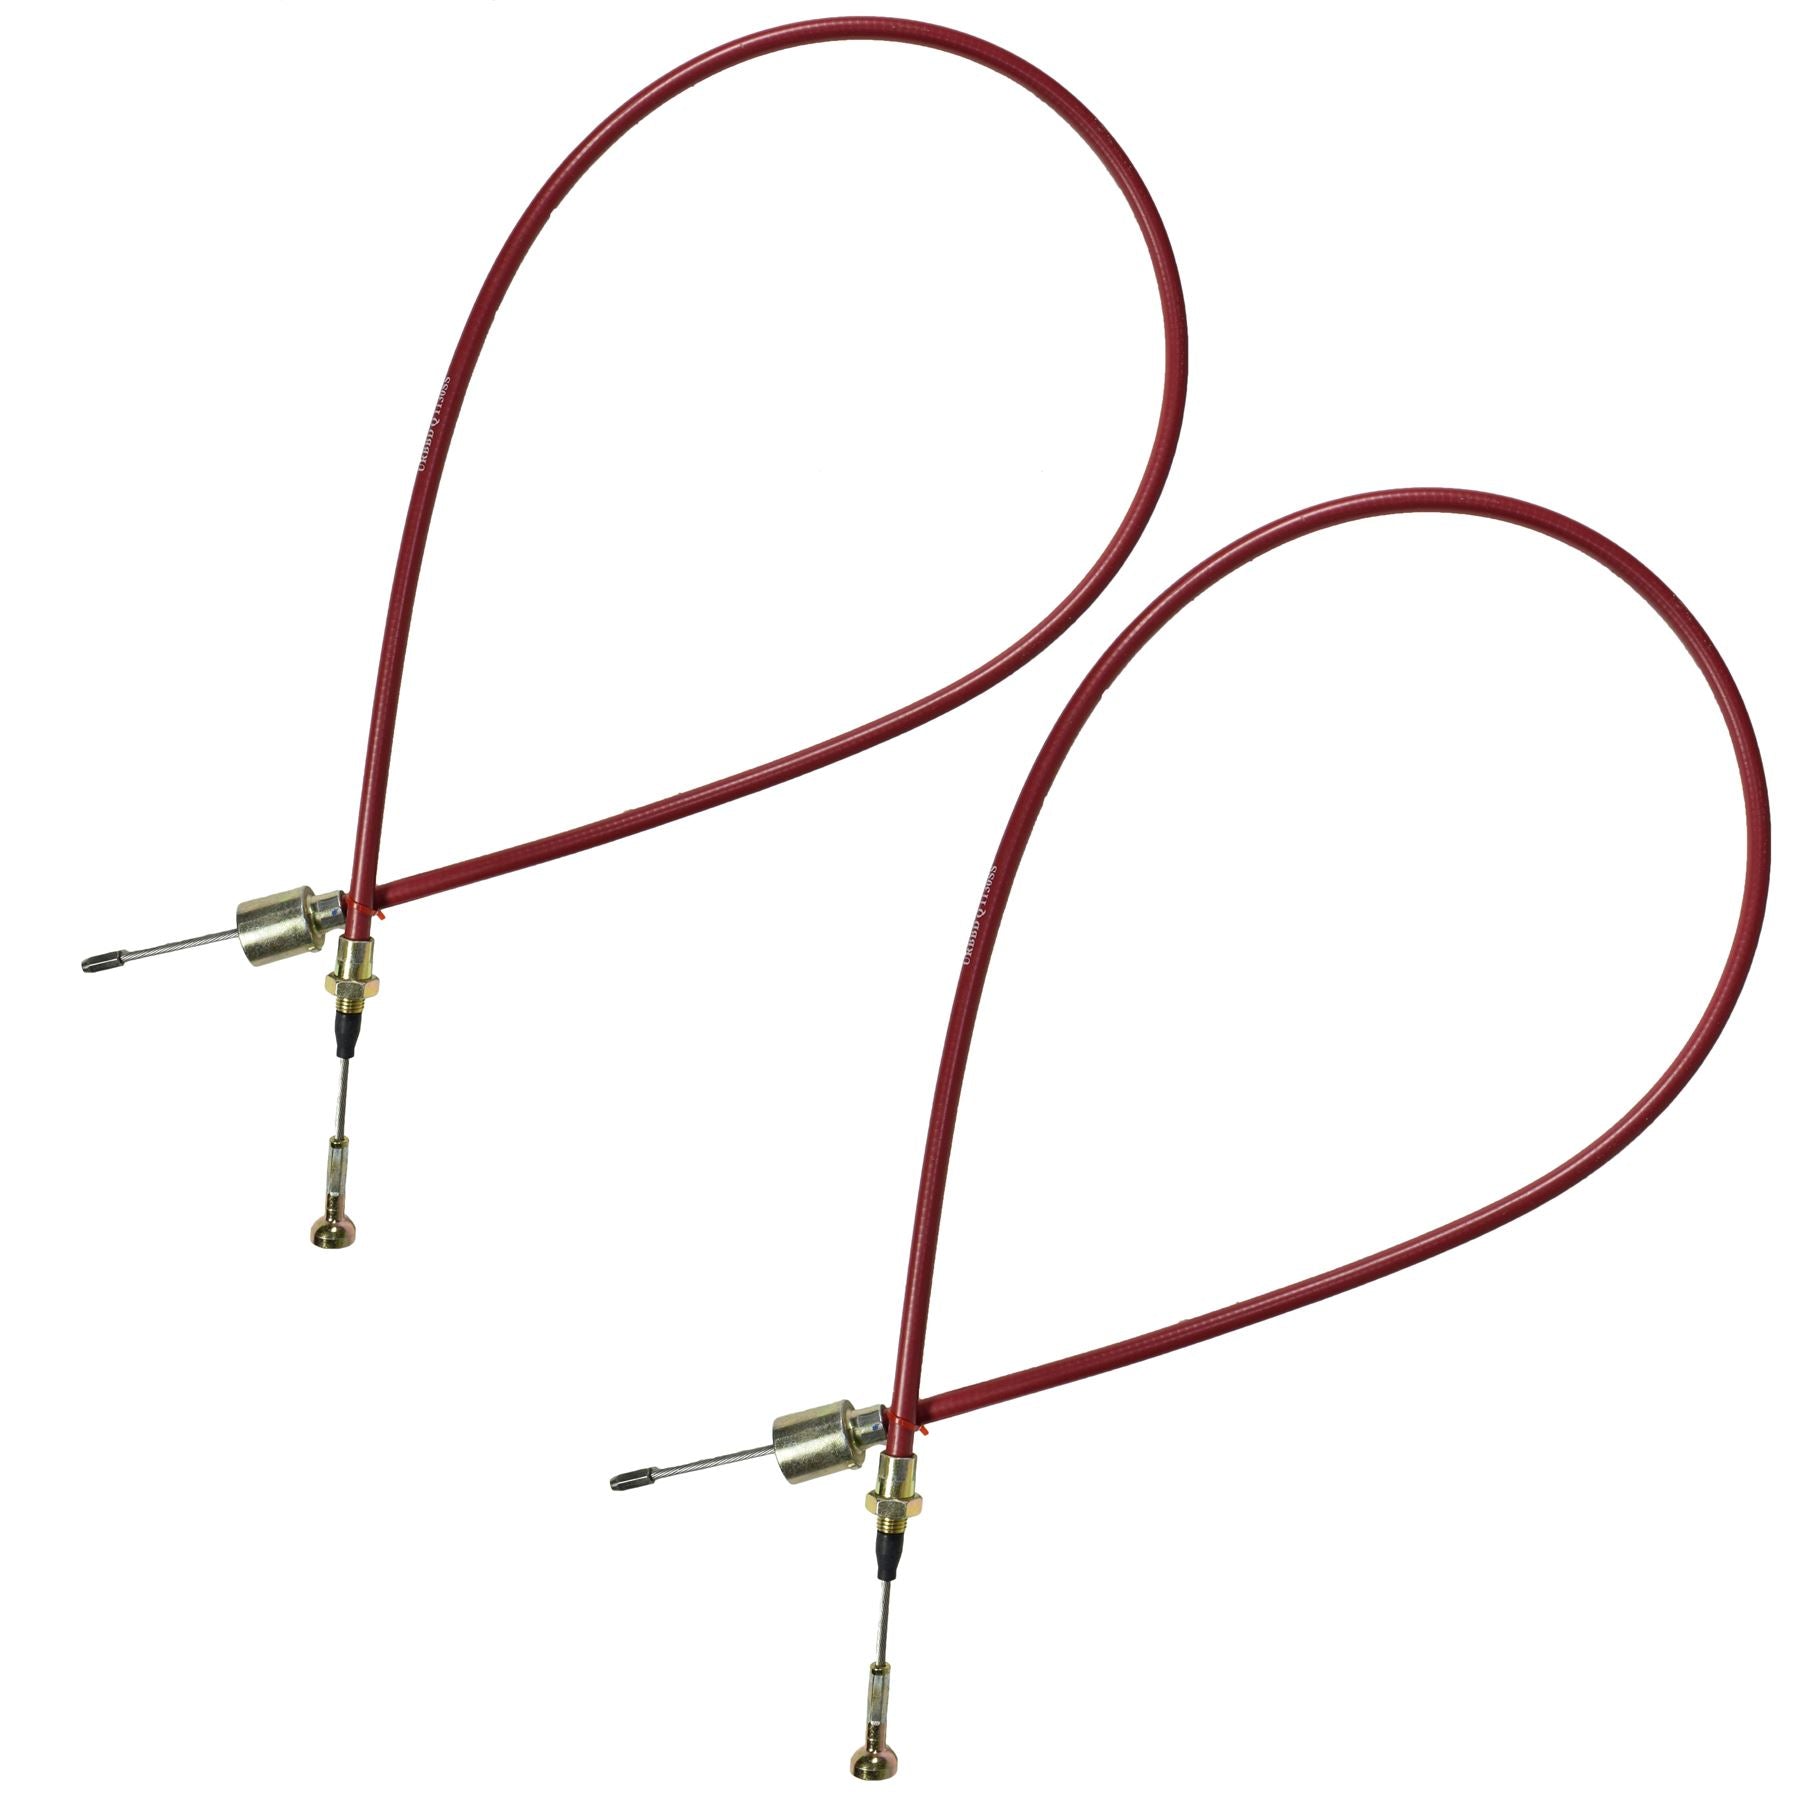 Stainless Steel Detachable ALKO Quick release brake cables with mushroom ends